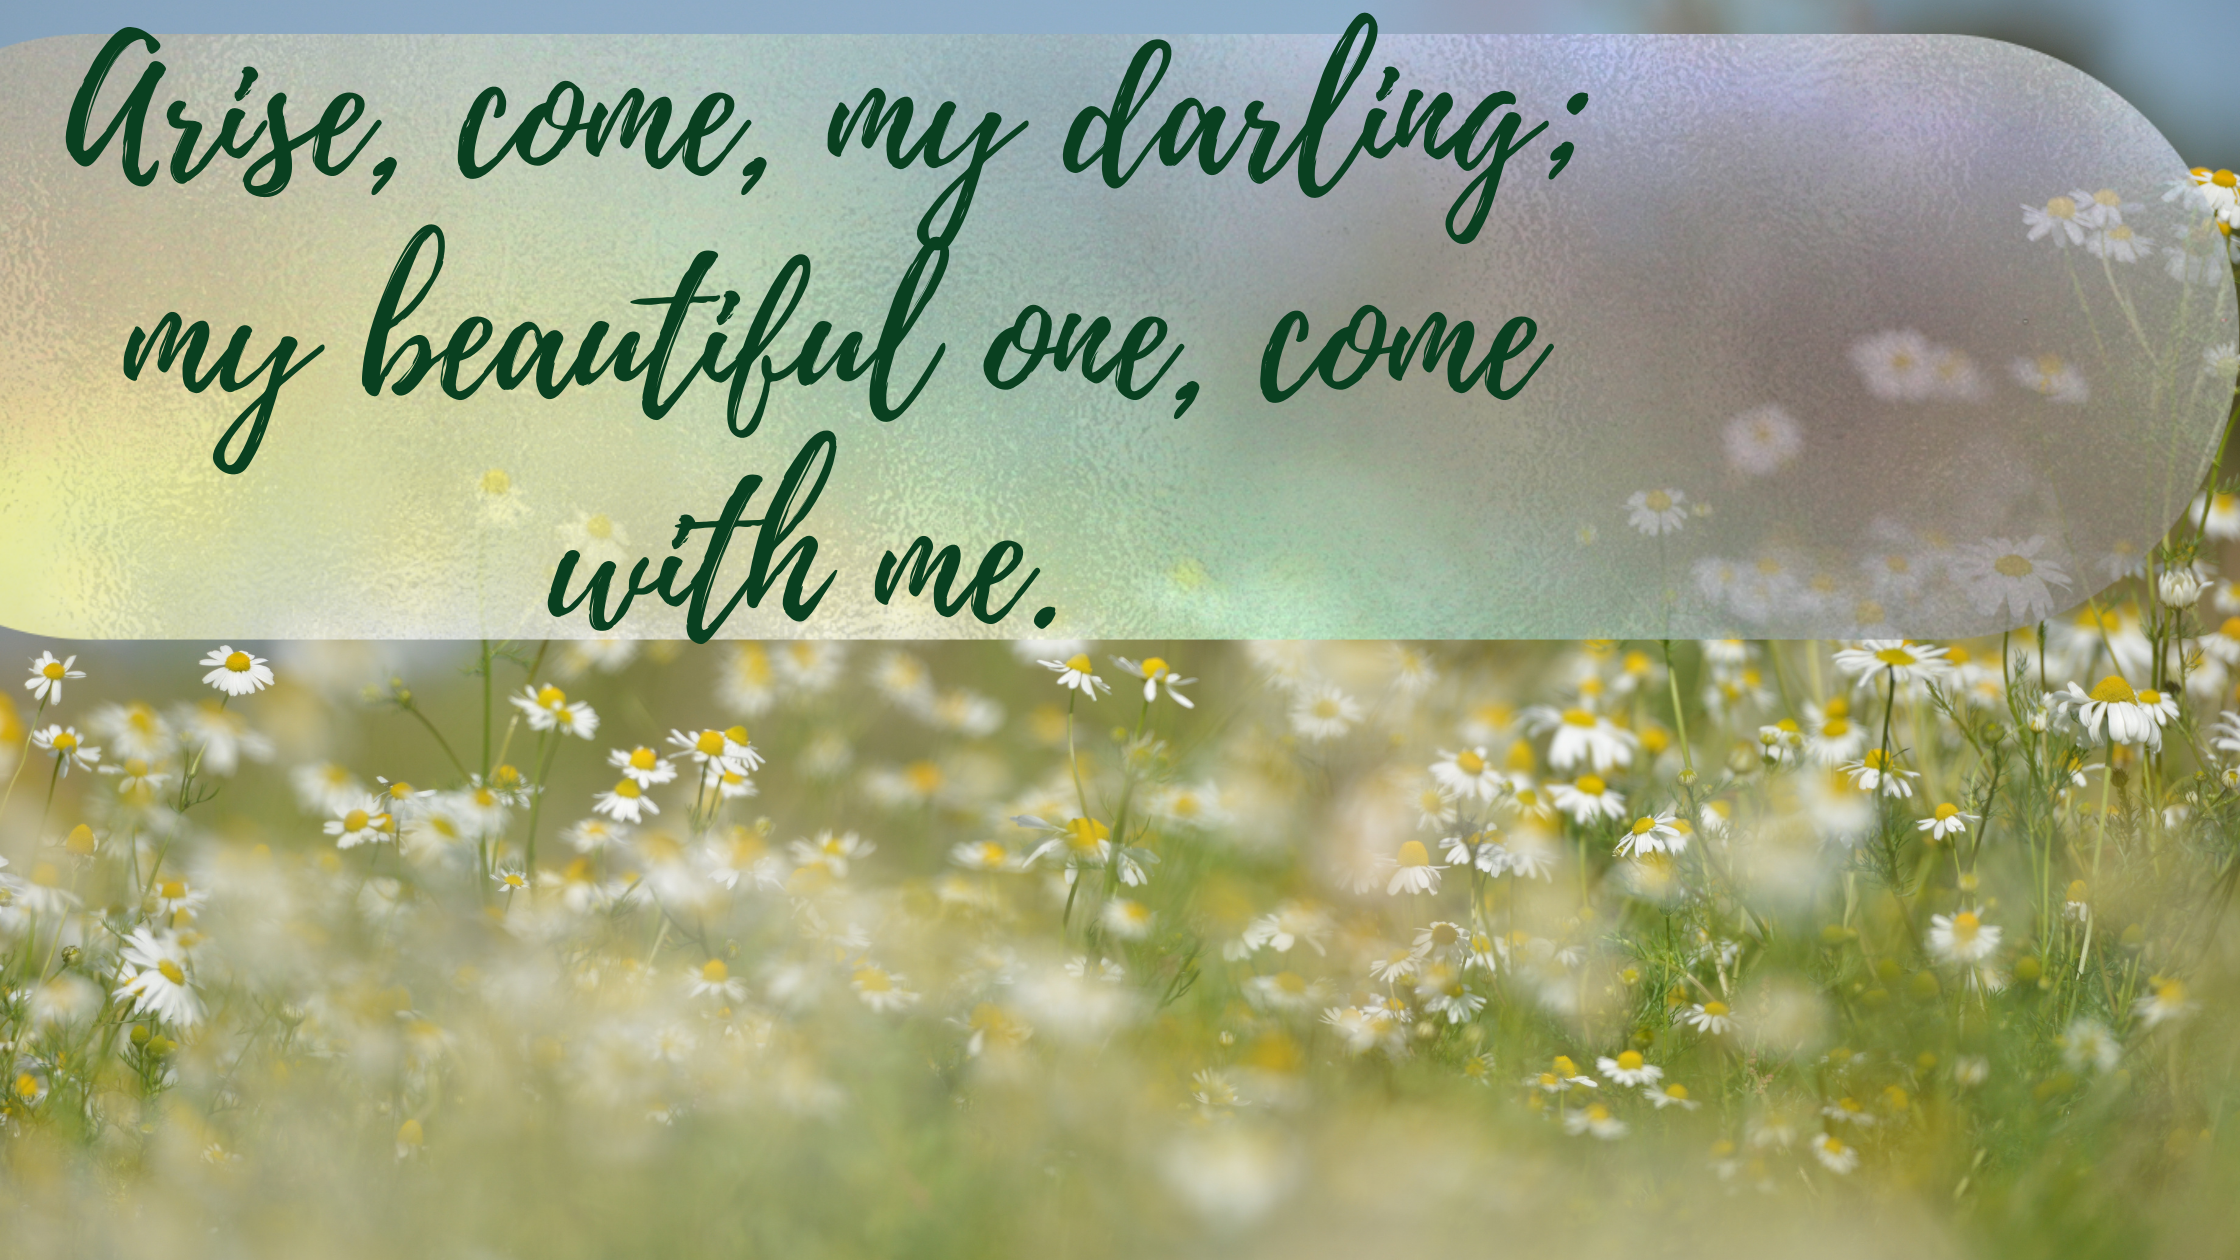 Arise, come, my darling; my beautiful one, come with me.”